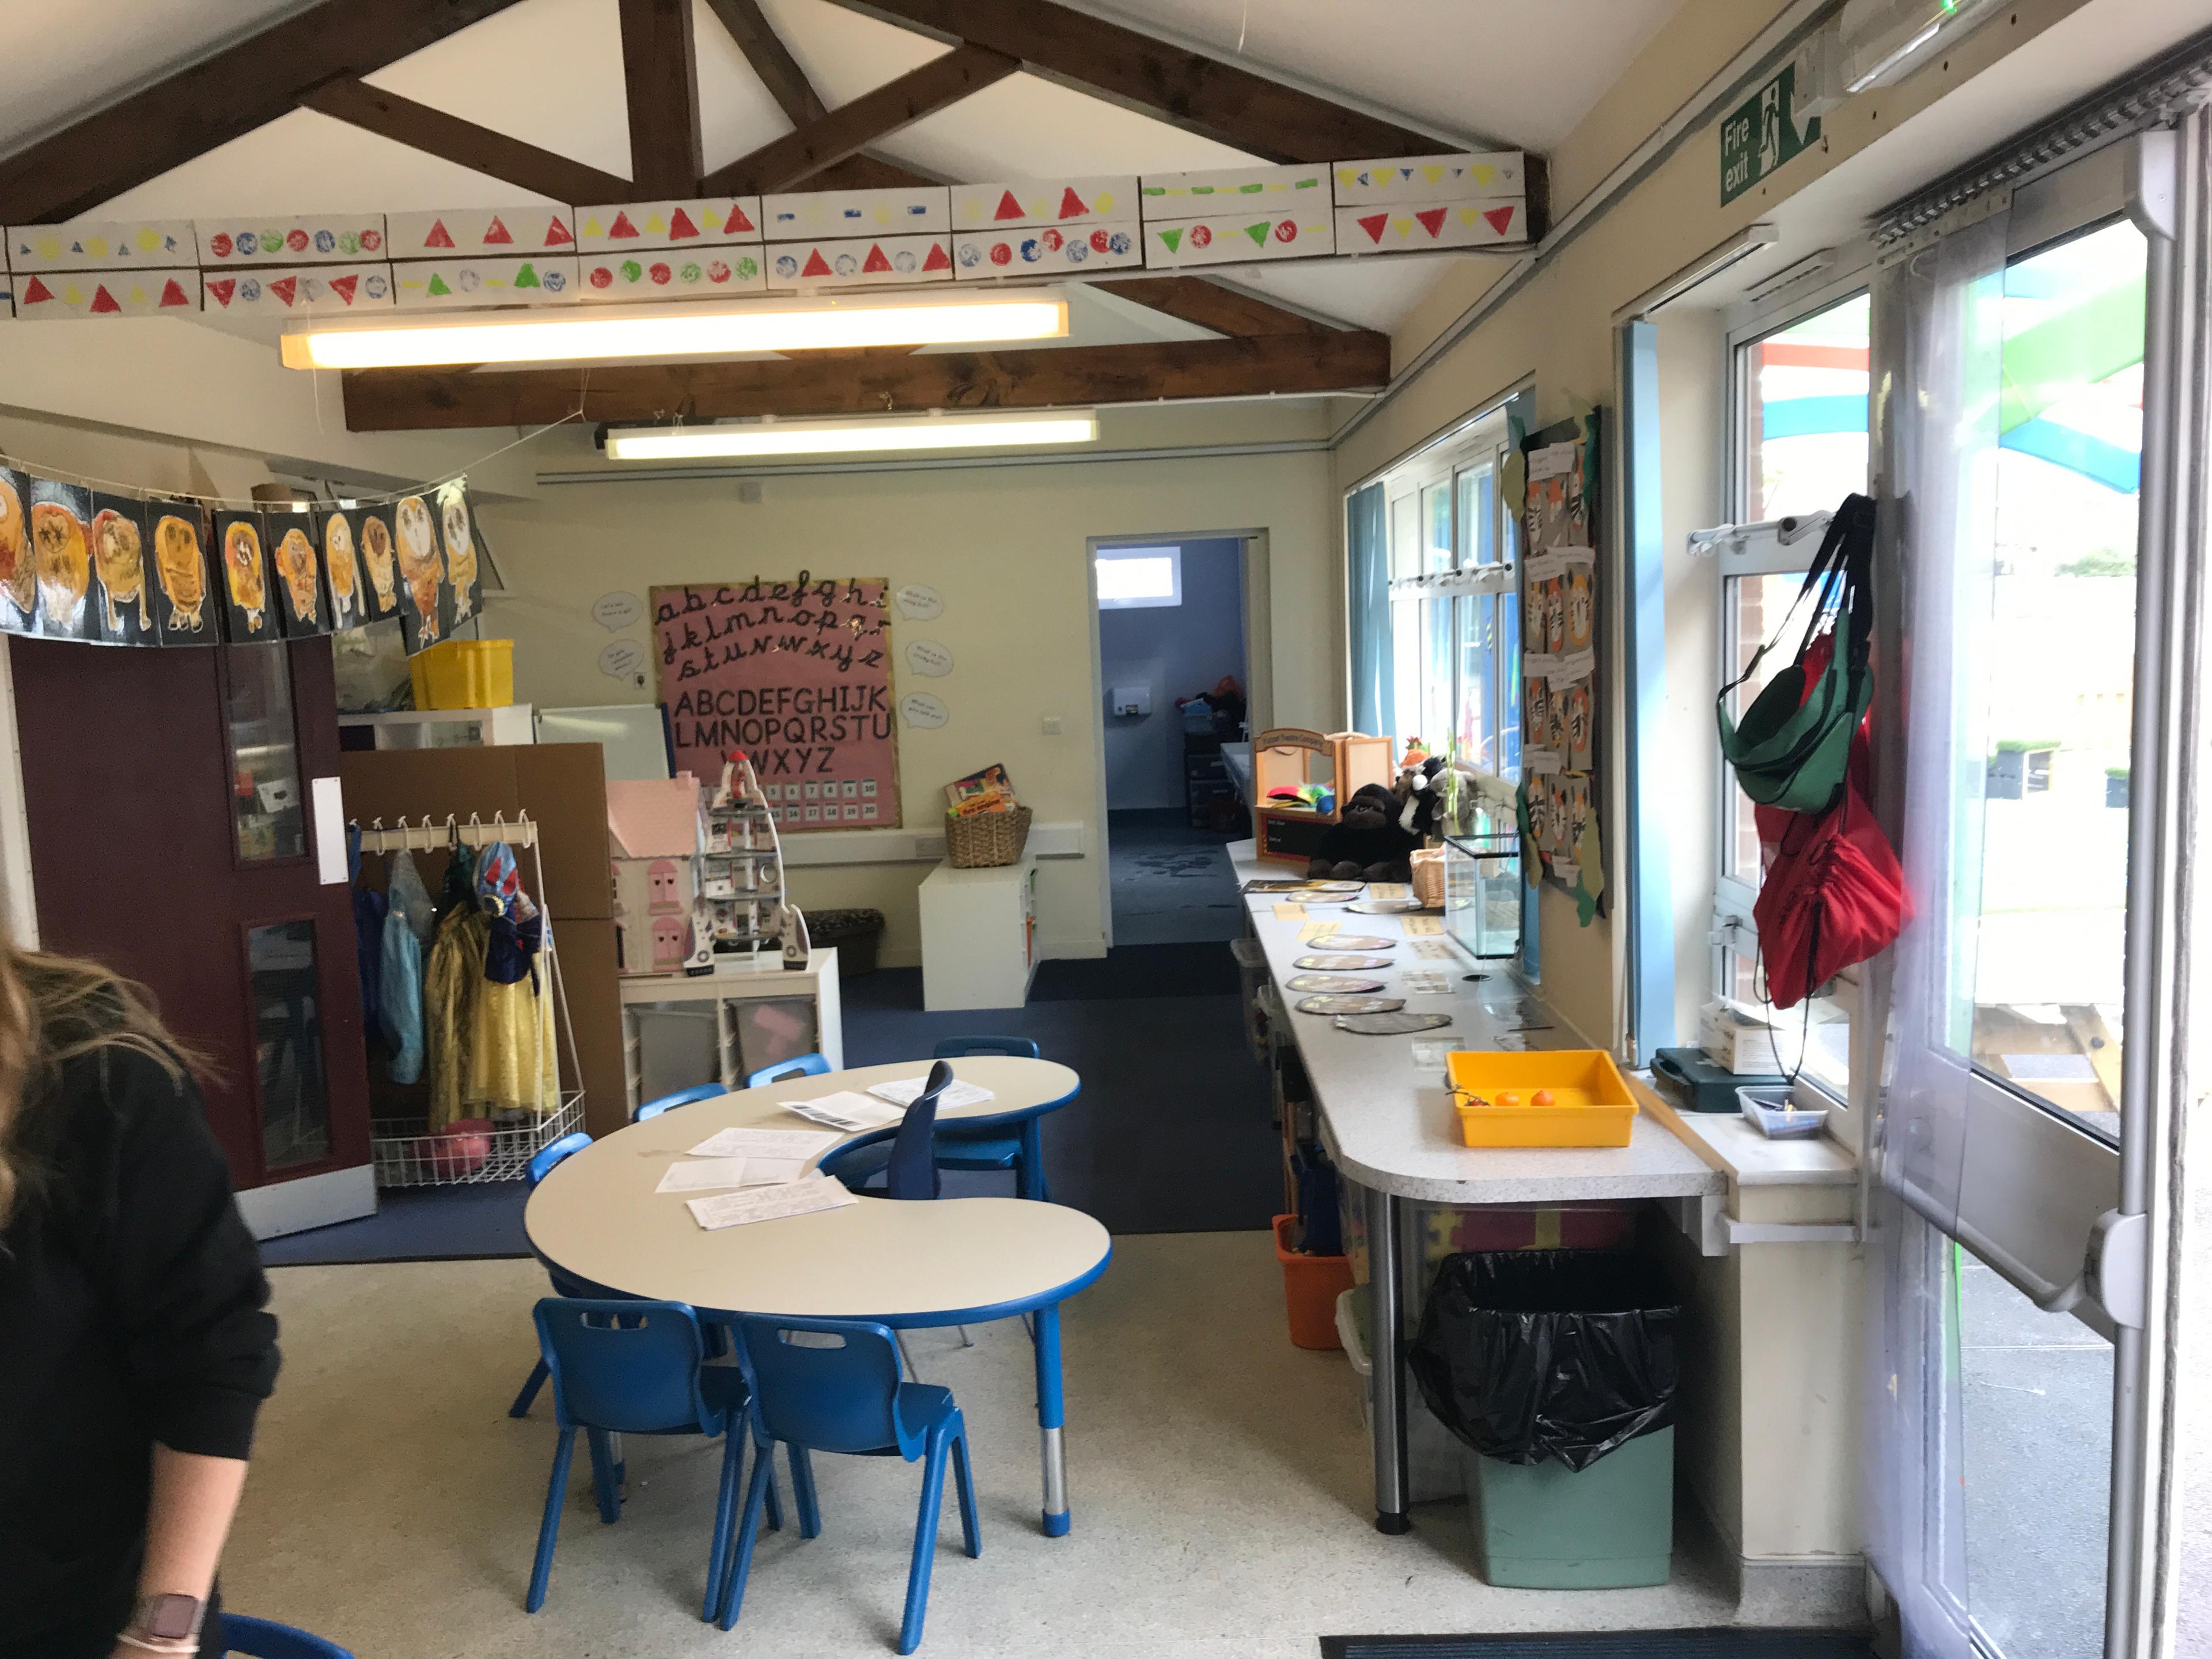 primary school classroom area with old furniture and plastic seating